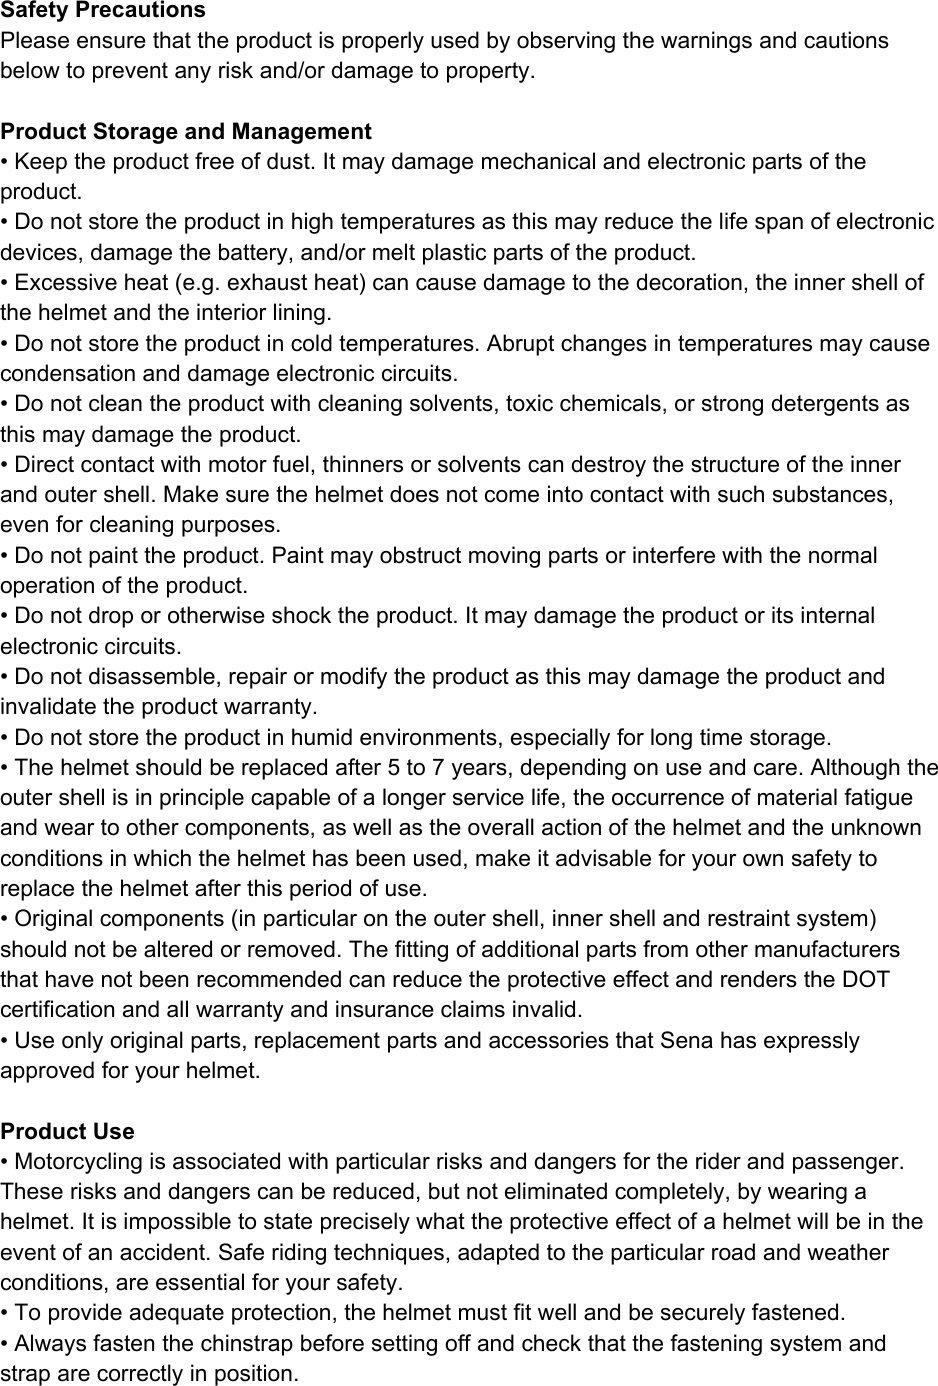   Safety Precautions Please ensure that the product is properly used by observing the warnings and cautions below to prevent any risk and/or damage to property.  Product Storage and Management • Keep the product free of dust. It may damage mechanical and electronic parts of the product. • Do not store the product in high temperatures as this may reduce the life span of electronic devices, damage the battery, and/or melt plastic parts of the product. • Excessive heat (e.g. exhaust heat) can cause damage to the decoration, the inner shell of the helmet and the interior lining. • Do not store the product in cold temperatures. Abrupt changes in temperatures may cause condensation and damage electronic circuits. • Do not clean the product with cleaning solvents, toxic chemicals, or strong detergents as this may damage the product. • Direct contact with motor fuel, thinners or solvents can destroy the structure of the inner and outer shell. Make sure the helmet does not come into contact with such substances, even for cleaning purposes.  • Do not paint the product. Paint may obstruct moving parts or interfere with the normal operation of the product. • Do not drop or otherwise shock the product. It may damage the product or its internal electronic circuits. • Do not disassemble, repair or modify the product as this may damage the product and invalidate the product warranty.  • Do not store the product in humid environments, especially for long time storage. • The helmet should be replaced after 5 to 7 years, depending on use and care. Although the outer shell is in principle capable of a longer service life, the occurrence of material fatigue and wear to other components, as well as the overall action of the helmet and the unknown conditions in which the helmet has been used, make it advisable for your own safety to replace the helmet after this period of use. • Original components (in particular on the outer shell, inner shell and restraint system) should not be altered or removed. The fitting of additional parts from other manufacturers that have not been recommended can reduce the protective effect and renders the DOT certification and all warranty and insurance claims invalid. • Use only original parts, replacement parts and accessories that Sena has expressly approved for your helmet.  Product Use • Motorcycling is associated with particular risks and dangers for the rider and passenger. These risks and dangers can be reduced, but not eliminated completely, by wearing a helmet. It is impossible to state precisely what the protective effect of a helmet will be in the event of an accident. Safe riding techniques, adapted to the particular road and weather conditions, are essential for your safety. • To provide adequate protection, the helmet must fit well and be securely fastened. • Always fasten the chinstrap before setting off and check that the fastening system and strap are correctly in position. 